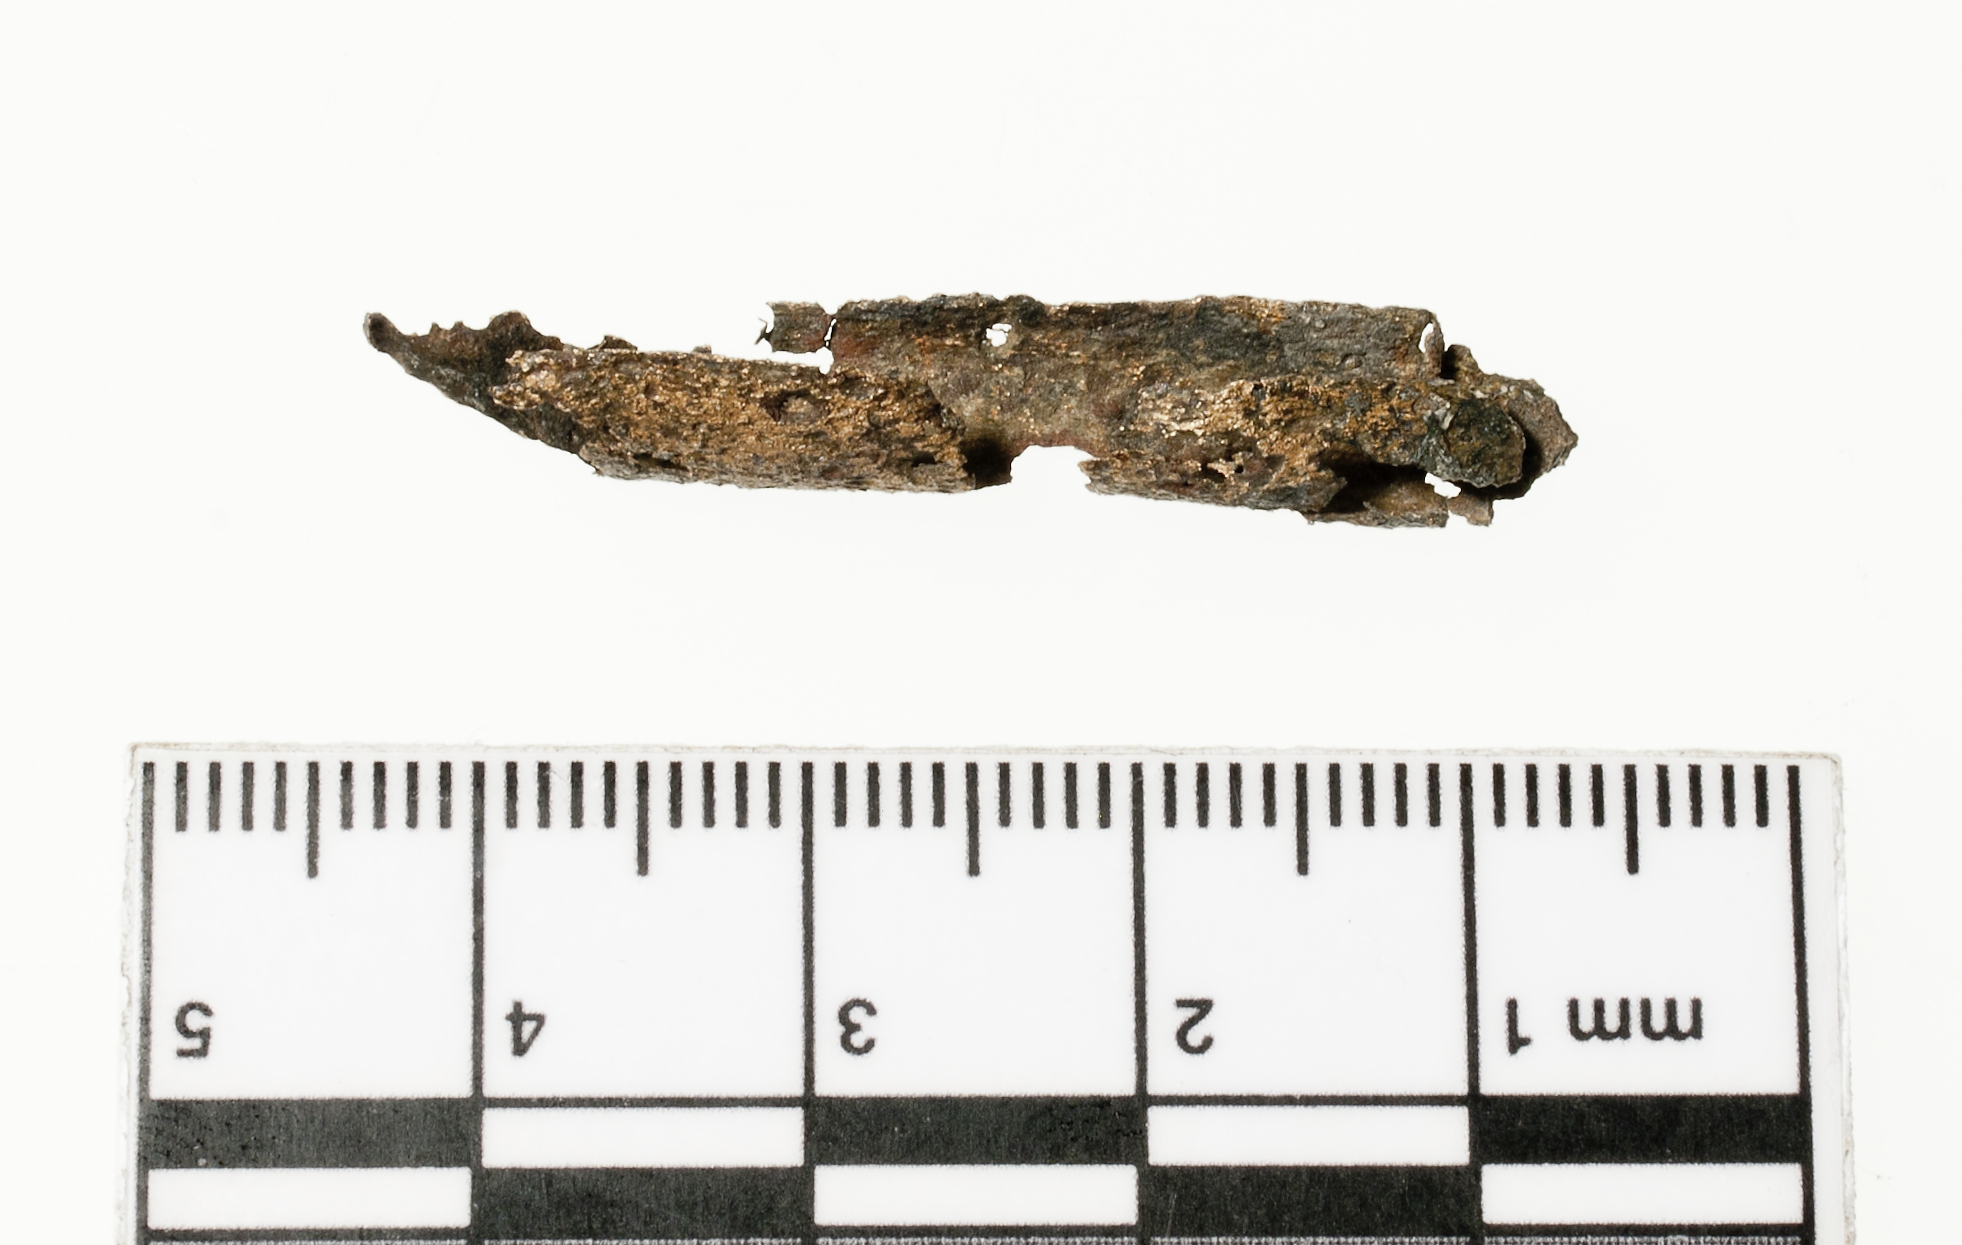 Medieval / Post-Medieval copper alloy object